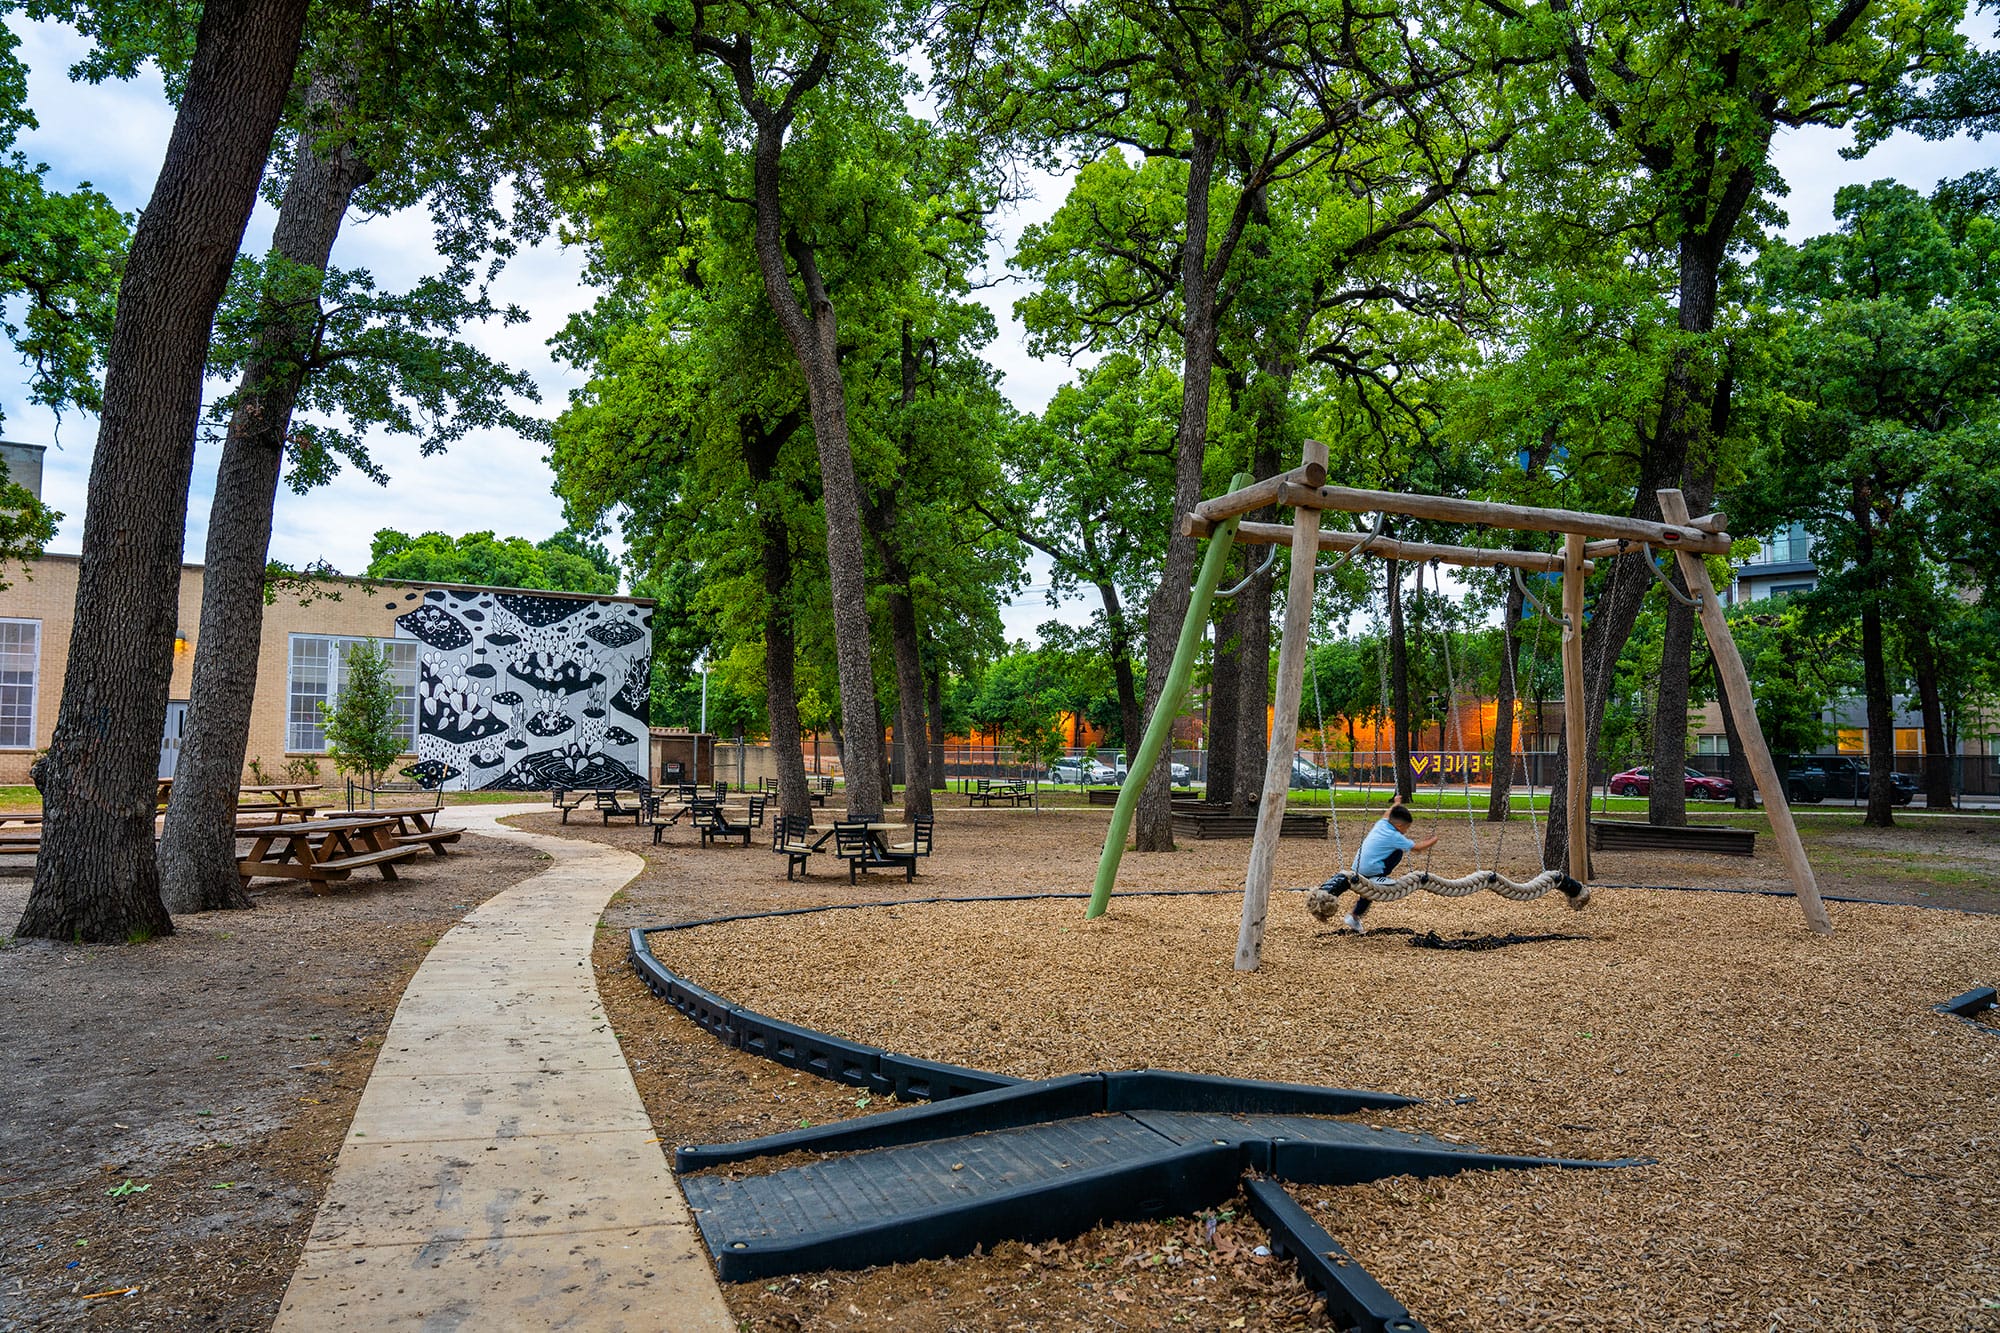 A playground with swings and benches.